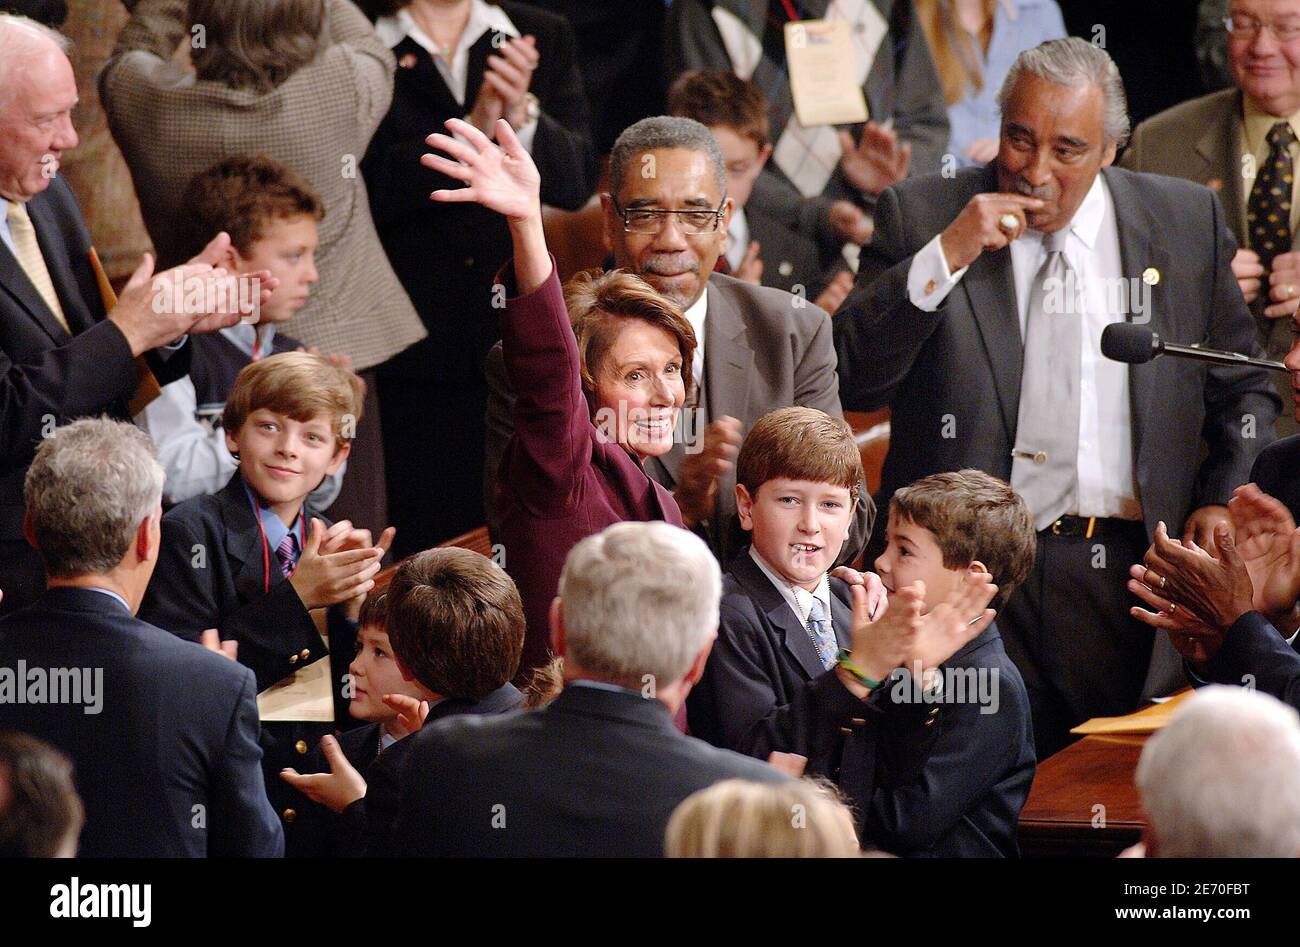 Speaker of the House Nancy Pelosi (D-CA) reacts after being elected as the first woman Speaker during a swearing in ceremony for the 110th Congress in the House Chamber of the U.S. Capitol, on January 4, 2007 in Washington, DC, USA. Pelosi will lead House Democrats as the Democratic Party takes control of both houses of Congress. Photo by Olivier Douliery/ABACAPRESS.COM Stock Photo